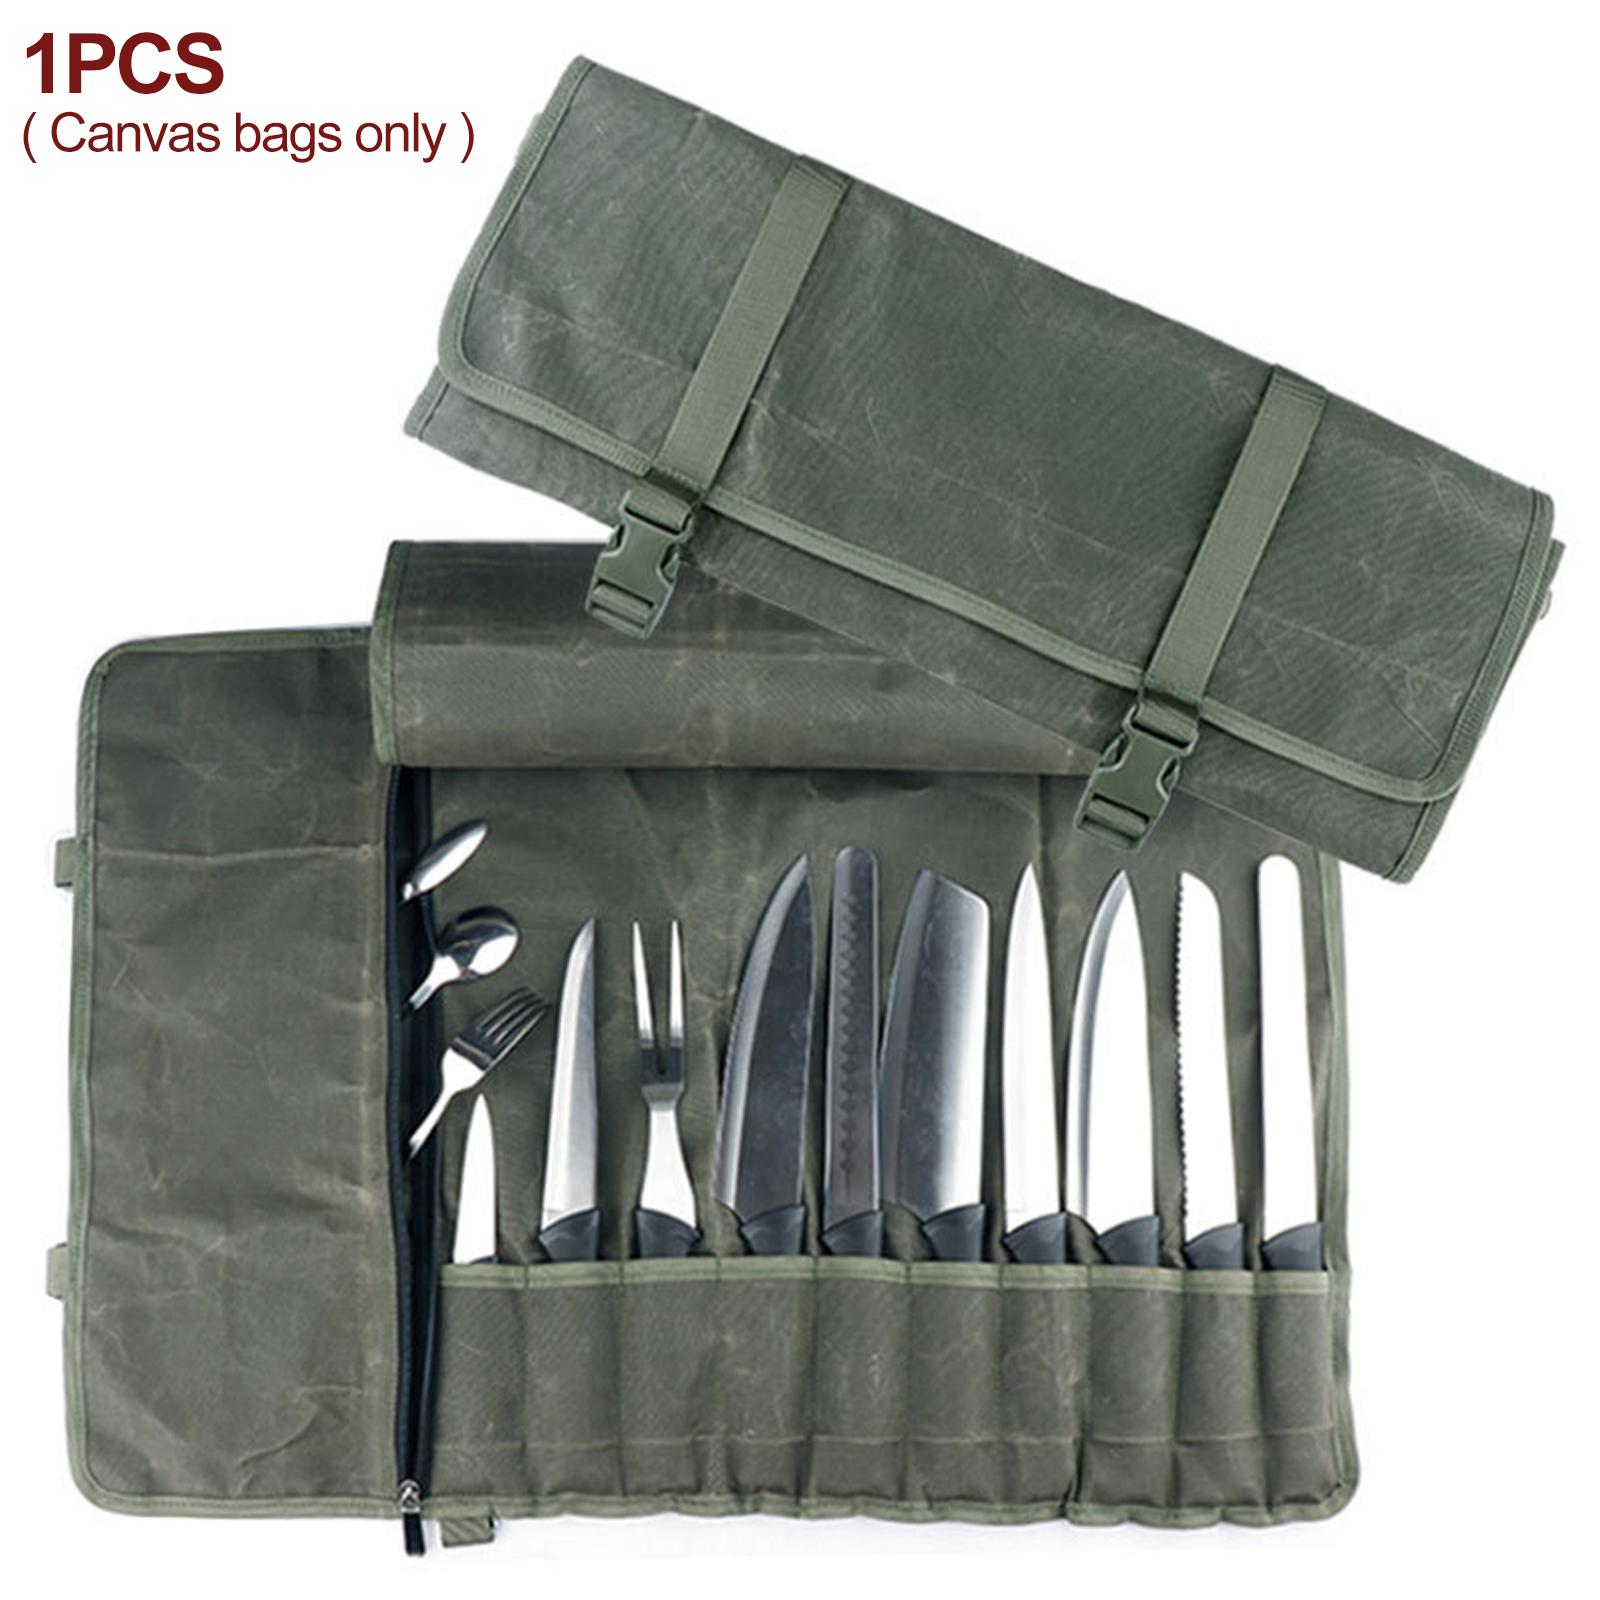 Bag Case Cooking Tools Storage for - image 3 of 8